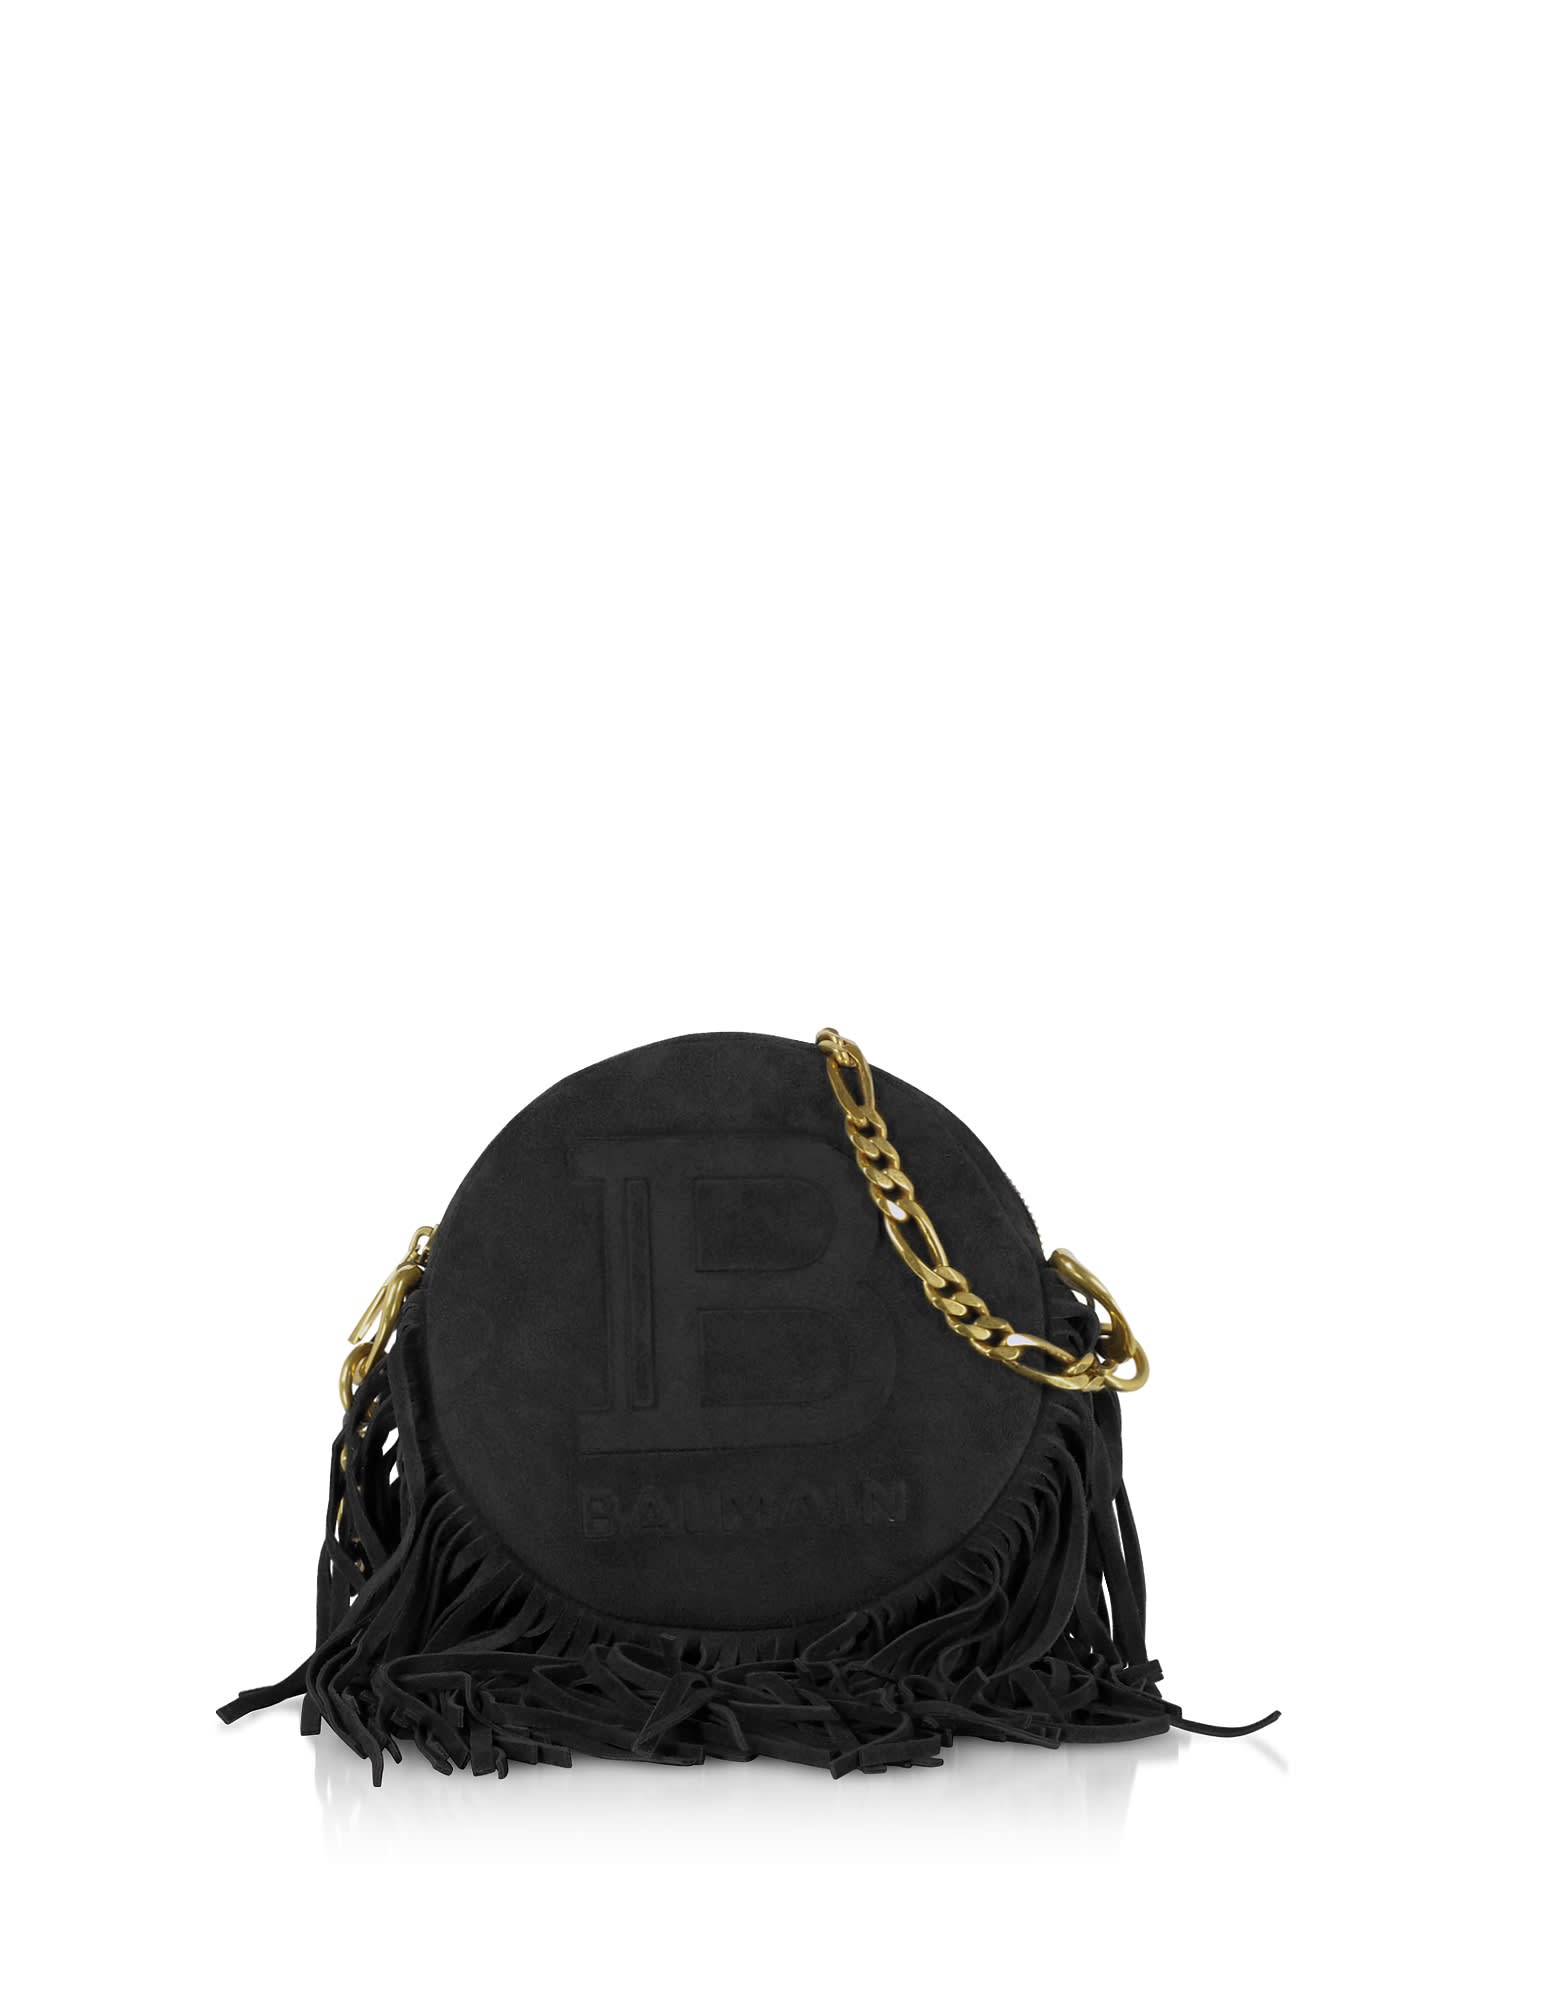 BALMAIN SUEDE LEATHER AND FRINGES 18 DISCO BAG,11256586